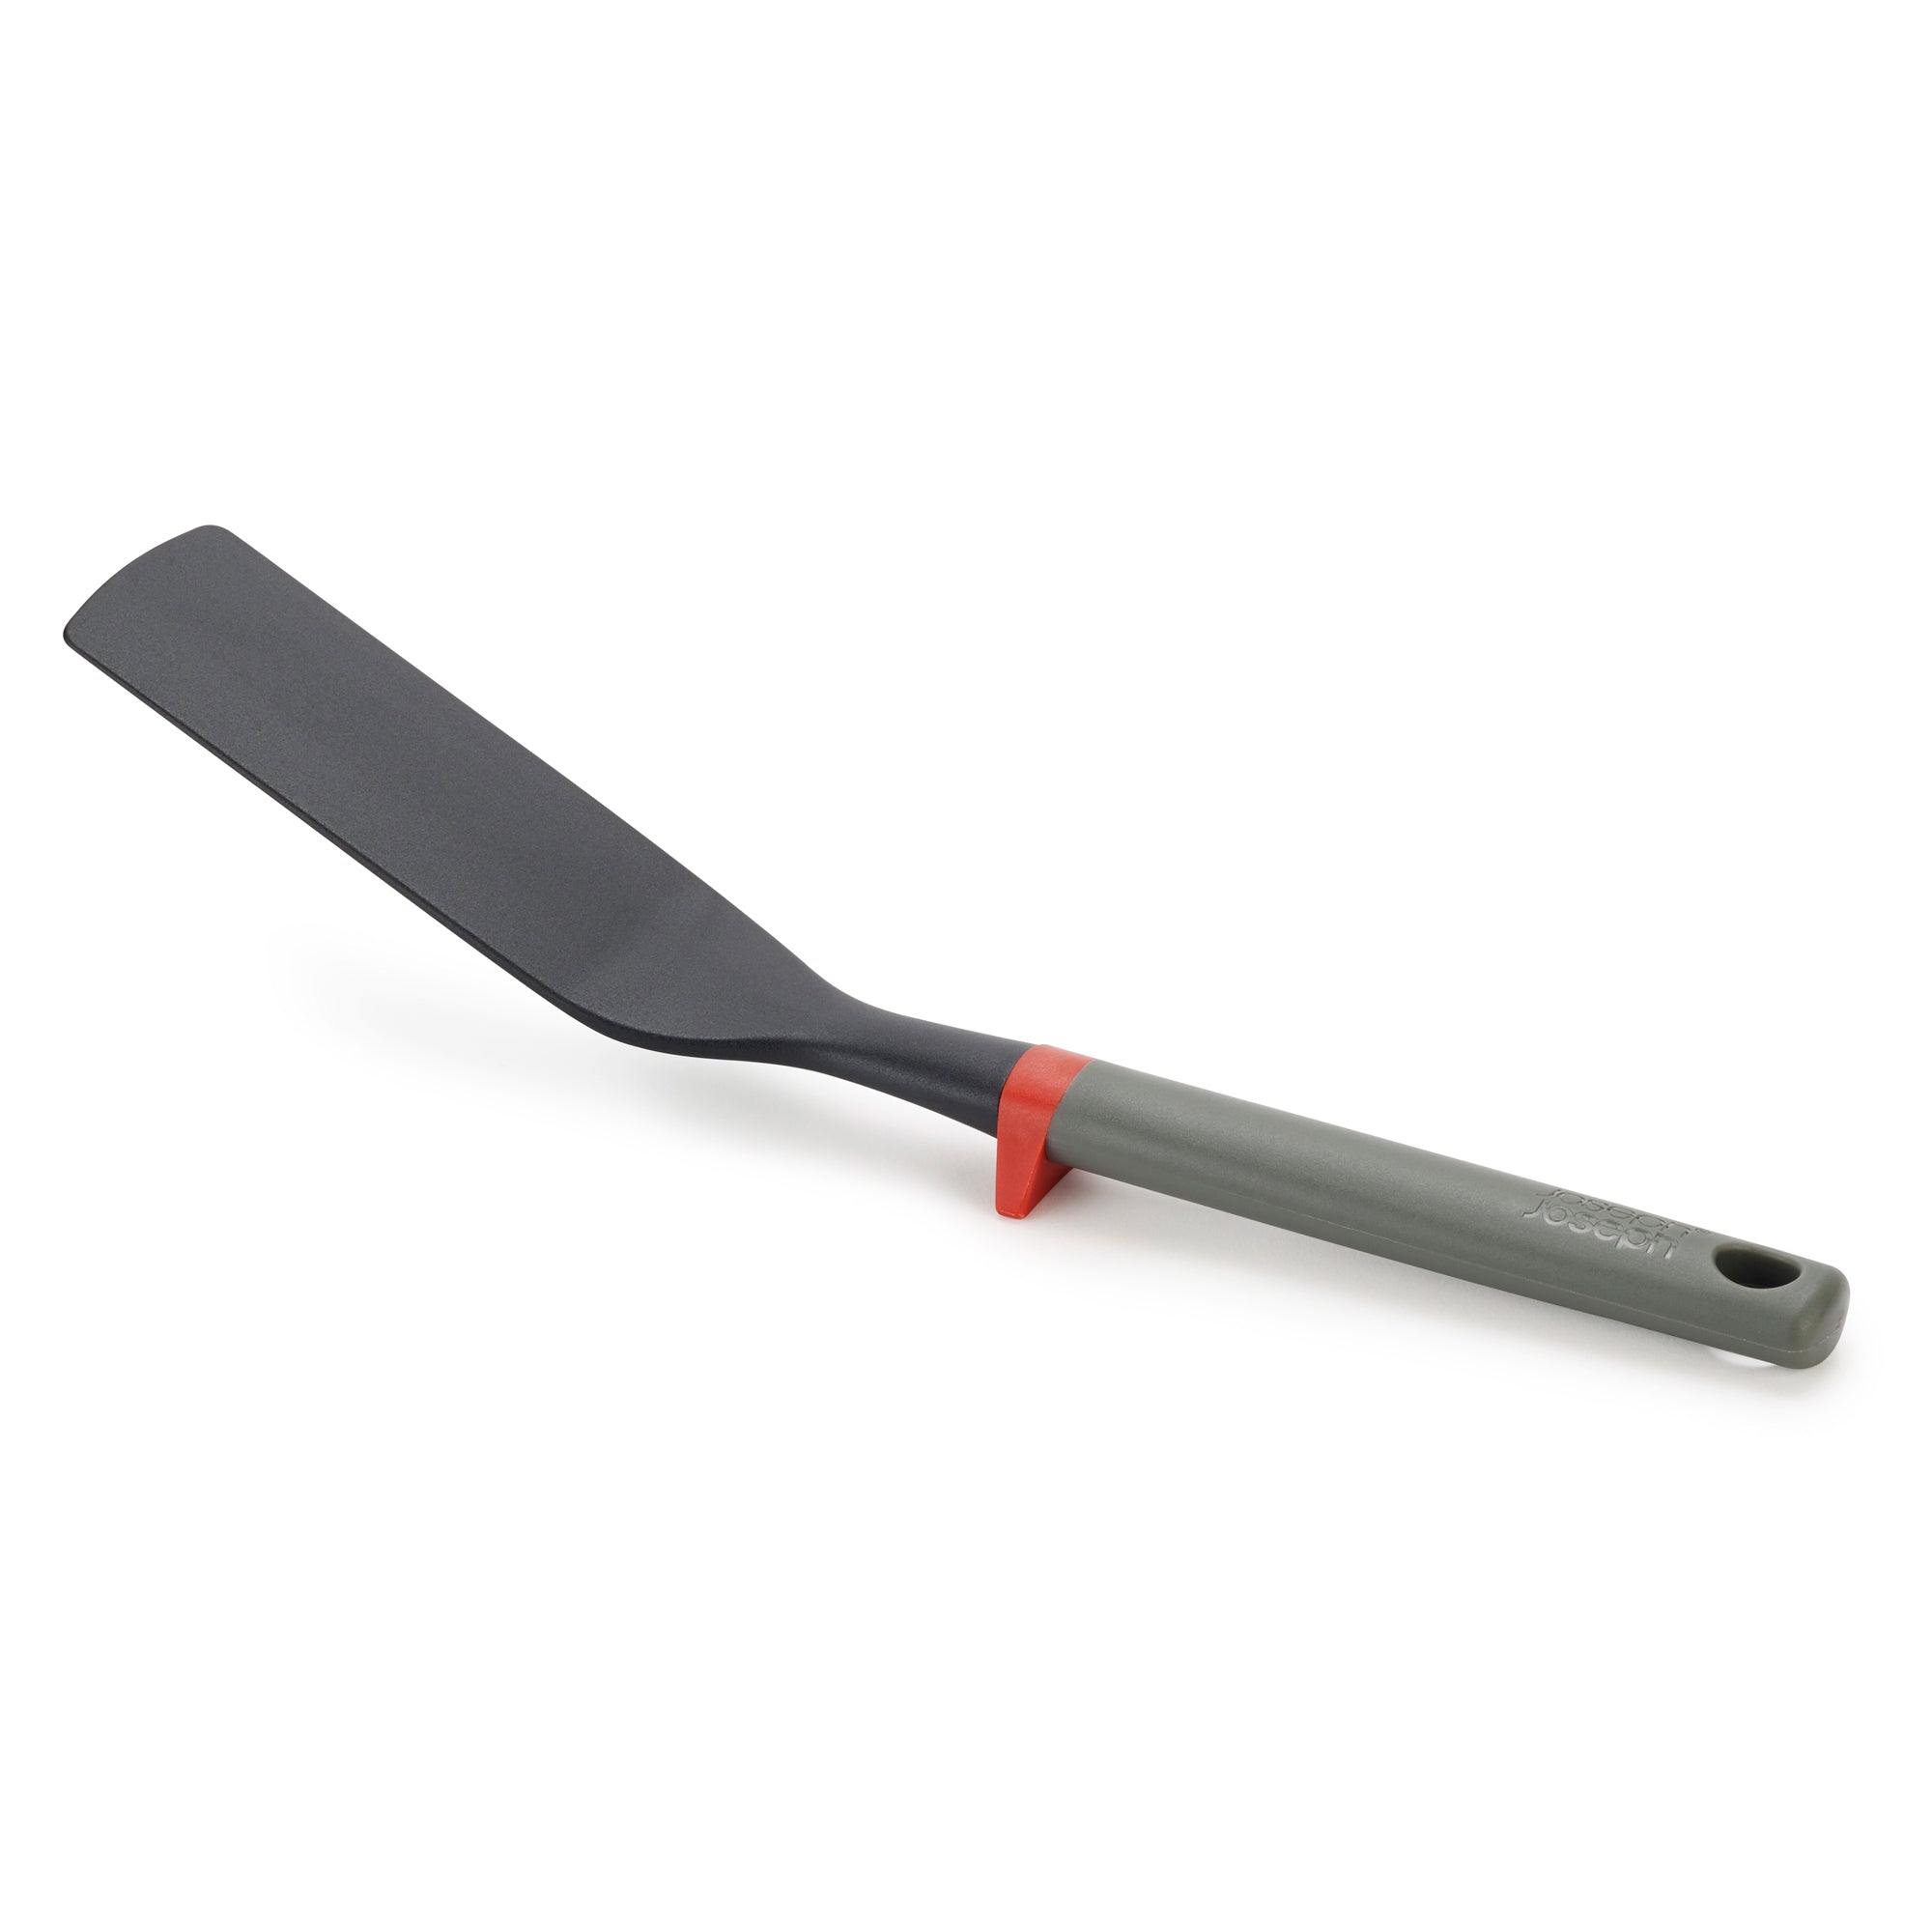 Duo Flexible Turner with Tool Rest - Grey/Red